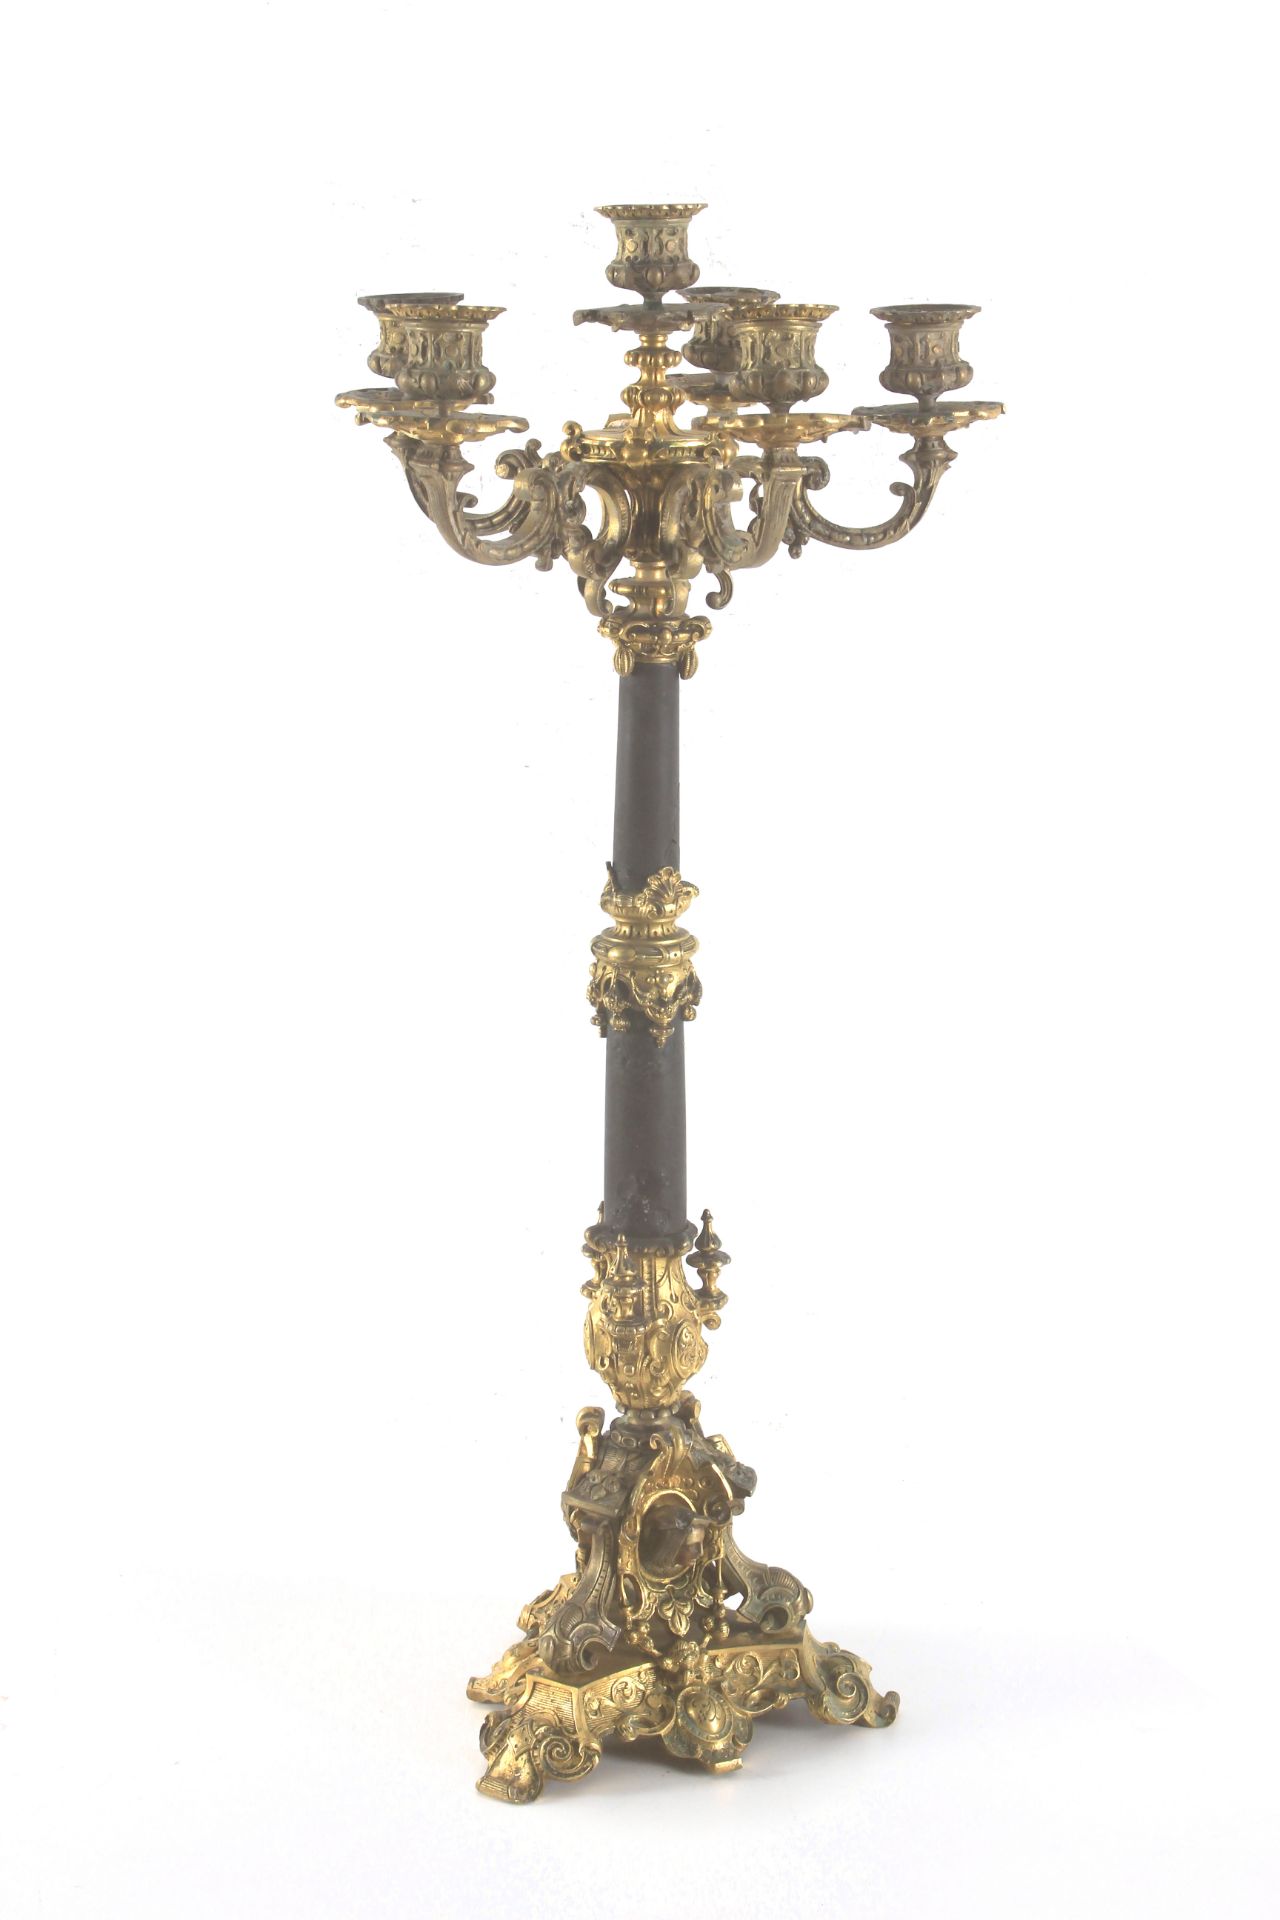 A 19th century Louis XV style French six light candelabrum - Image 7 of 8